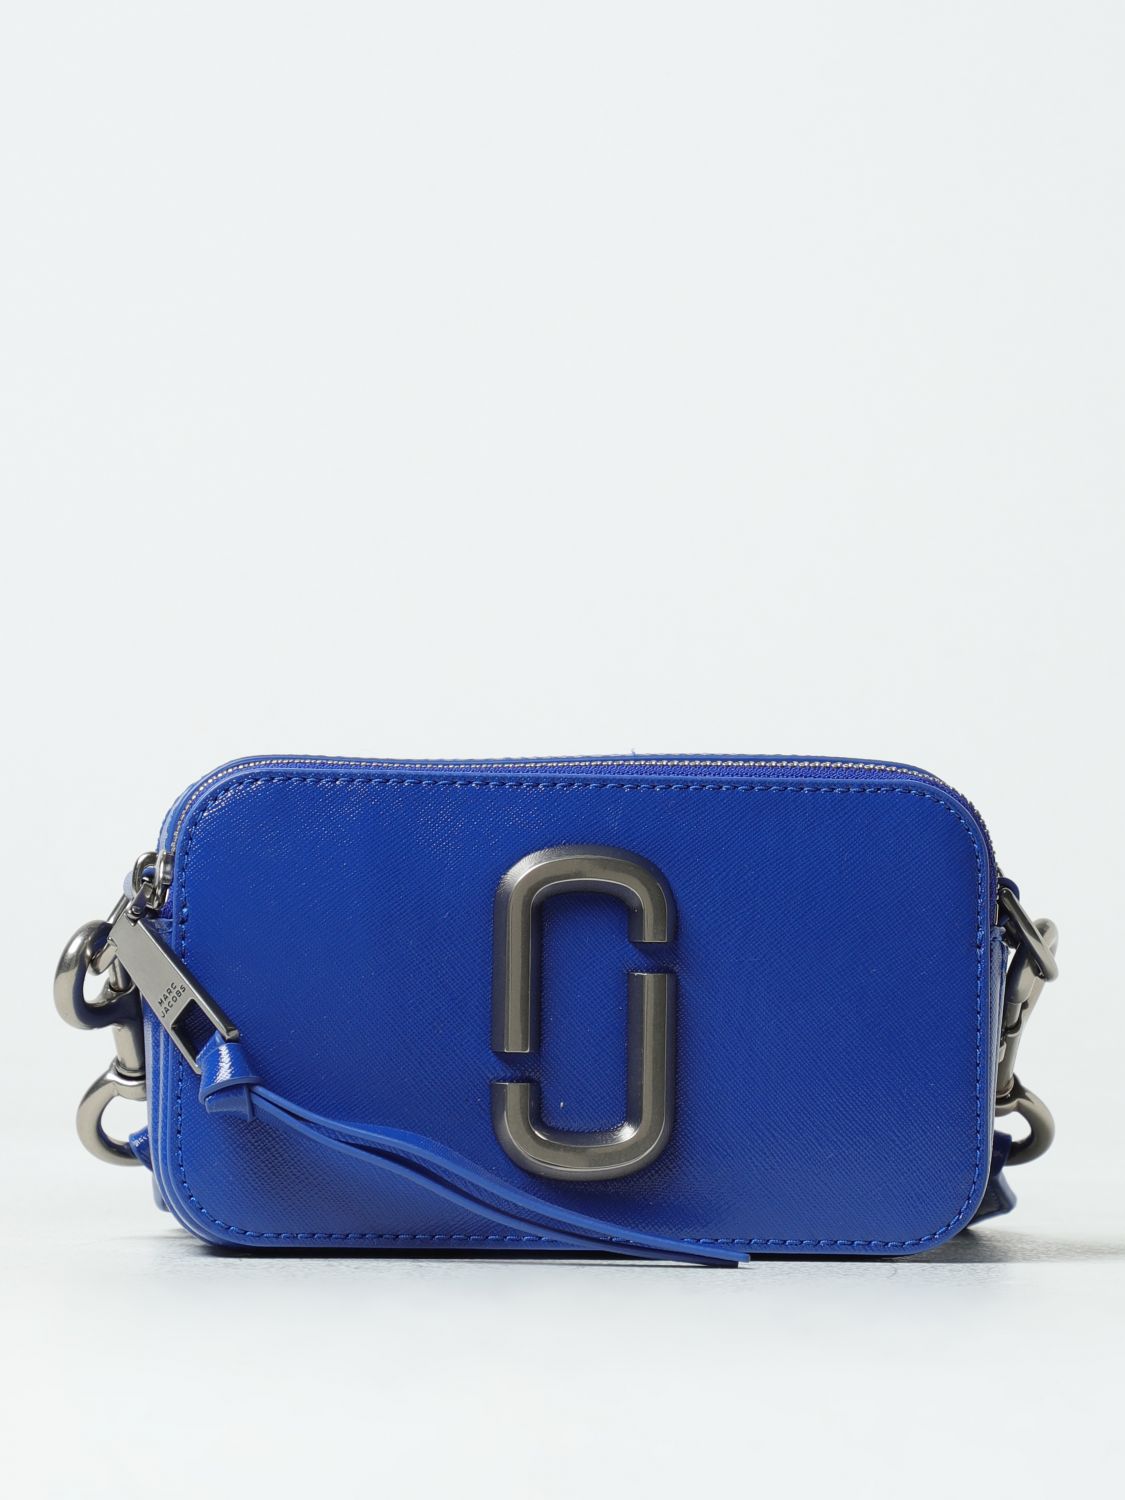 MARC JACOBS THE SNAPSHOT BAG IN SAFFIANO LEATHER,F09947014